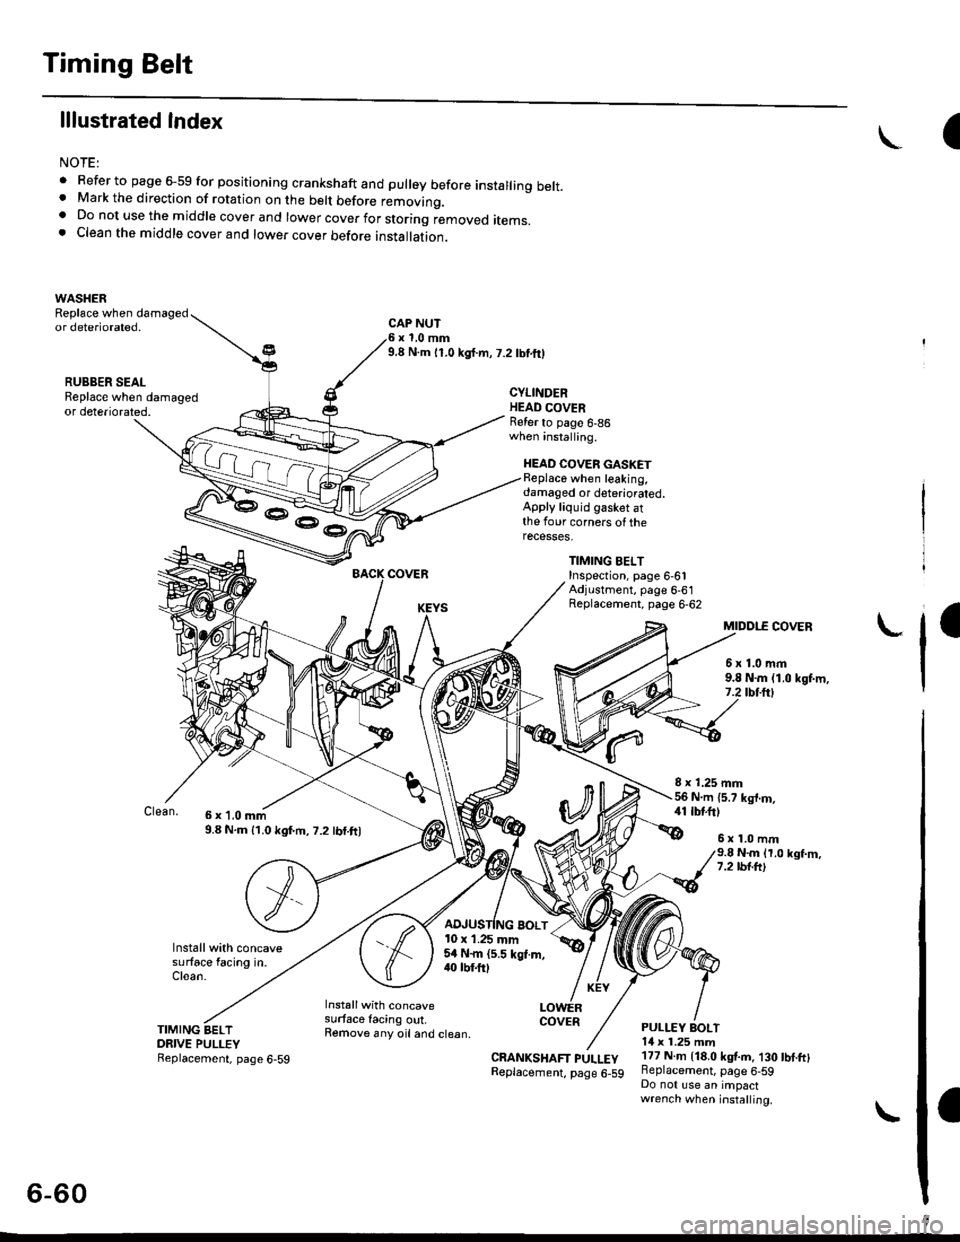 HONDA CIVIC 1996 6.G Owners Guide Timing Belt
lllustrated Index
NOTE:
. Refer to page 6-59 for positioning crankshaft and pulley before installing belt.. Mark the direction of rotation on the belt before removino.a Do not use the midd